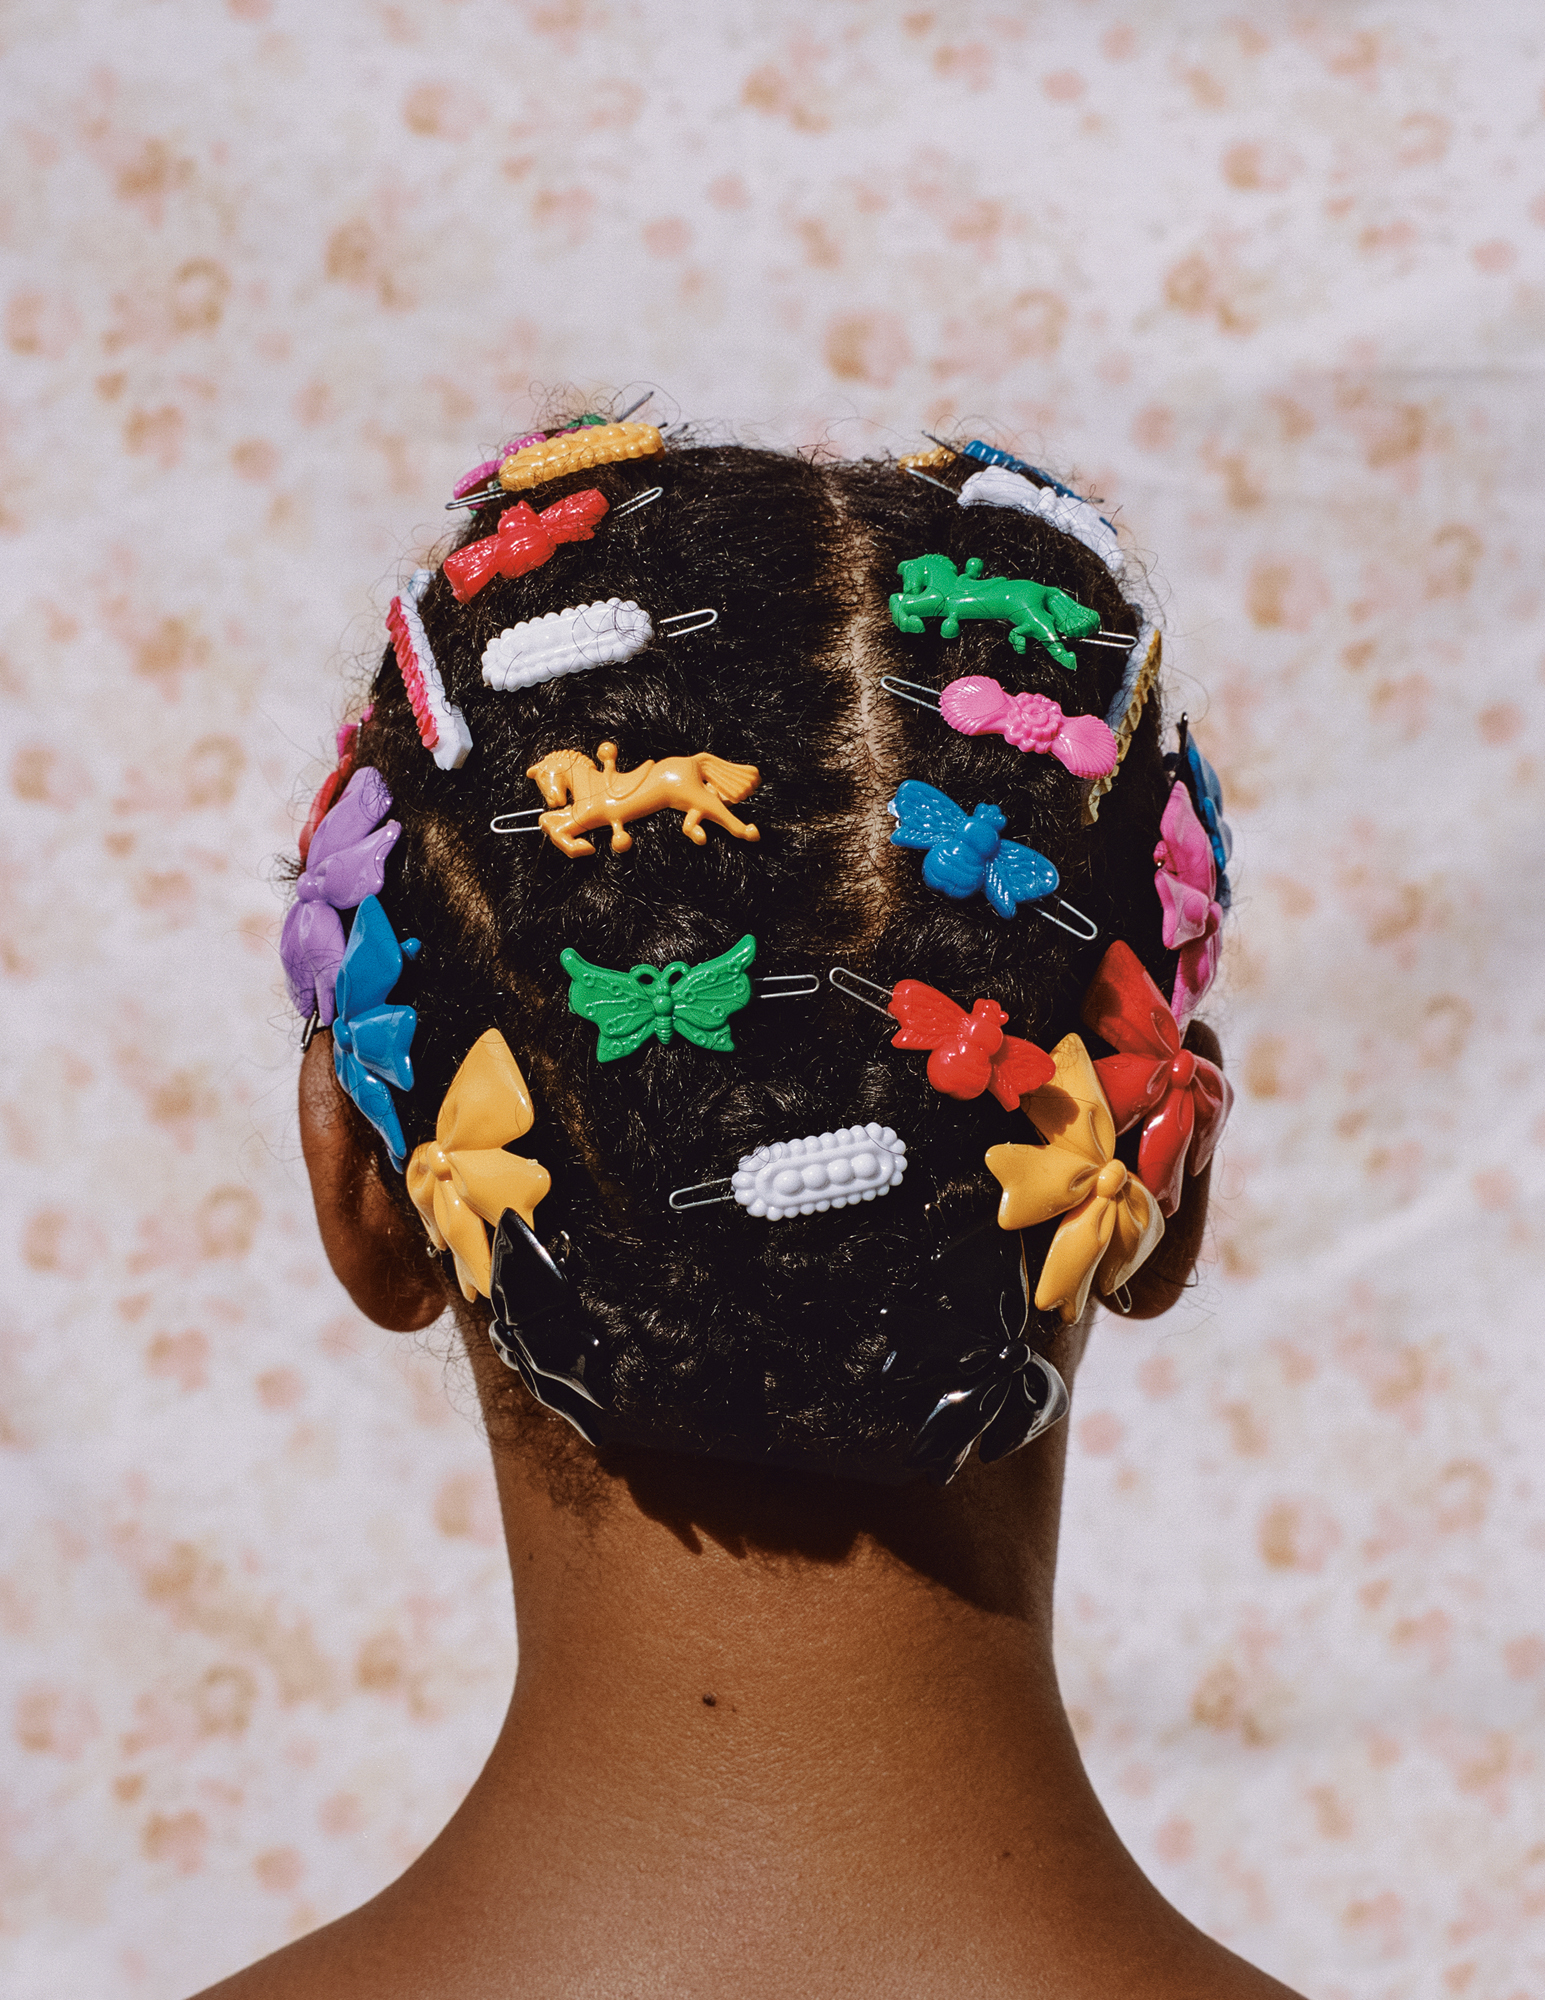 "Adeline in Barrettes," 2018, by Micaiah Carter, will part of the upcoming Cleveland Museum of Art exhibition, "The New Black Vanguard: Photography between Art and Fashion." Image courtesy of Aperture, New York, 2019. © Micaiah Carter